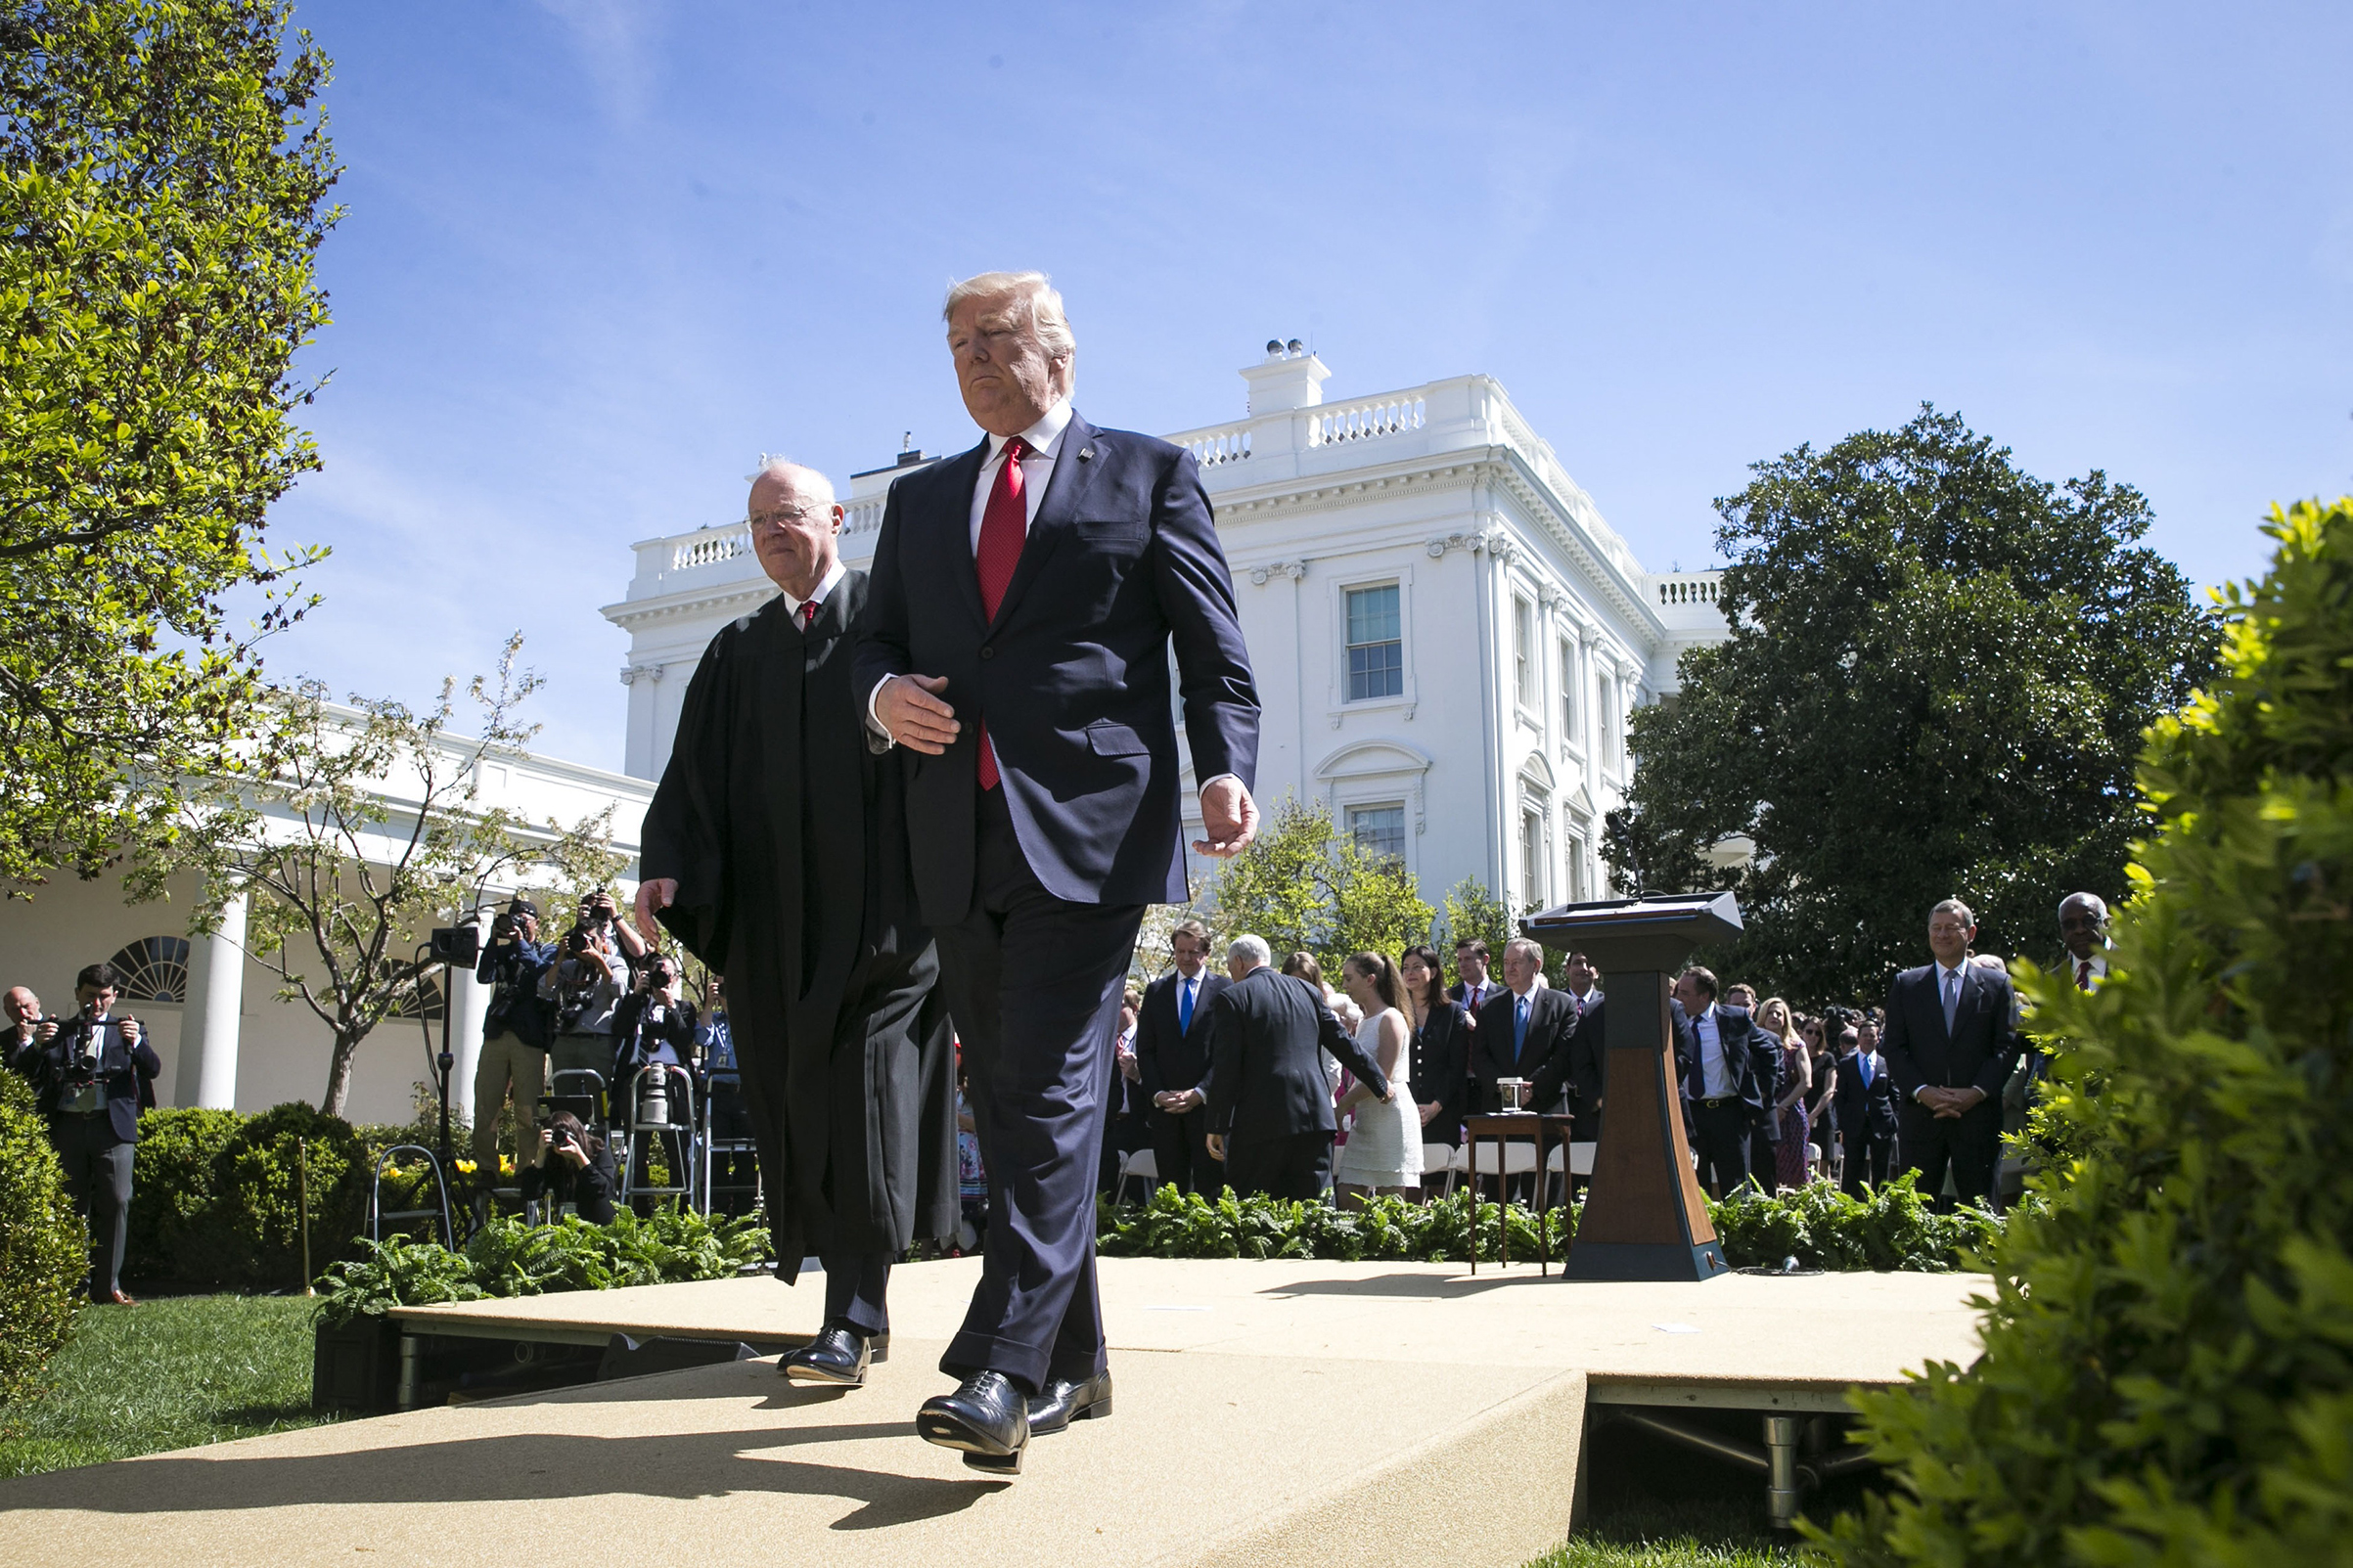 Anthony Kennedy leaves the Rose Garden with President Donald Trump April 10, 2017, after swearing in Neil Gorsuch as the 113th Supreme Court Justice. (Al Drago—The New York Times/Redux)